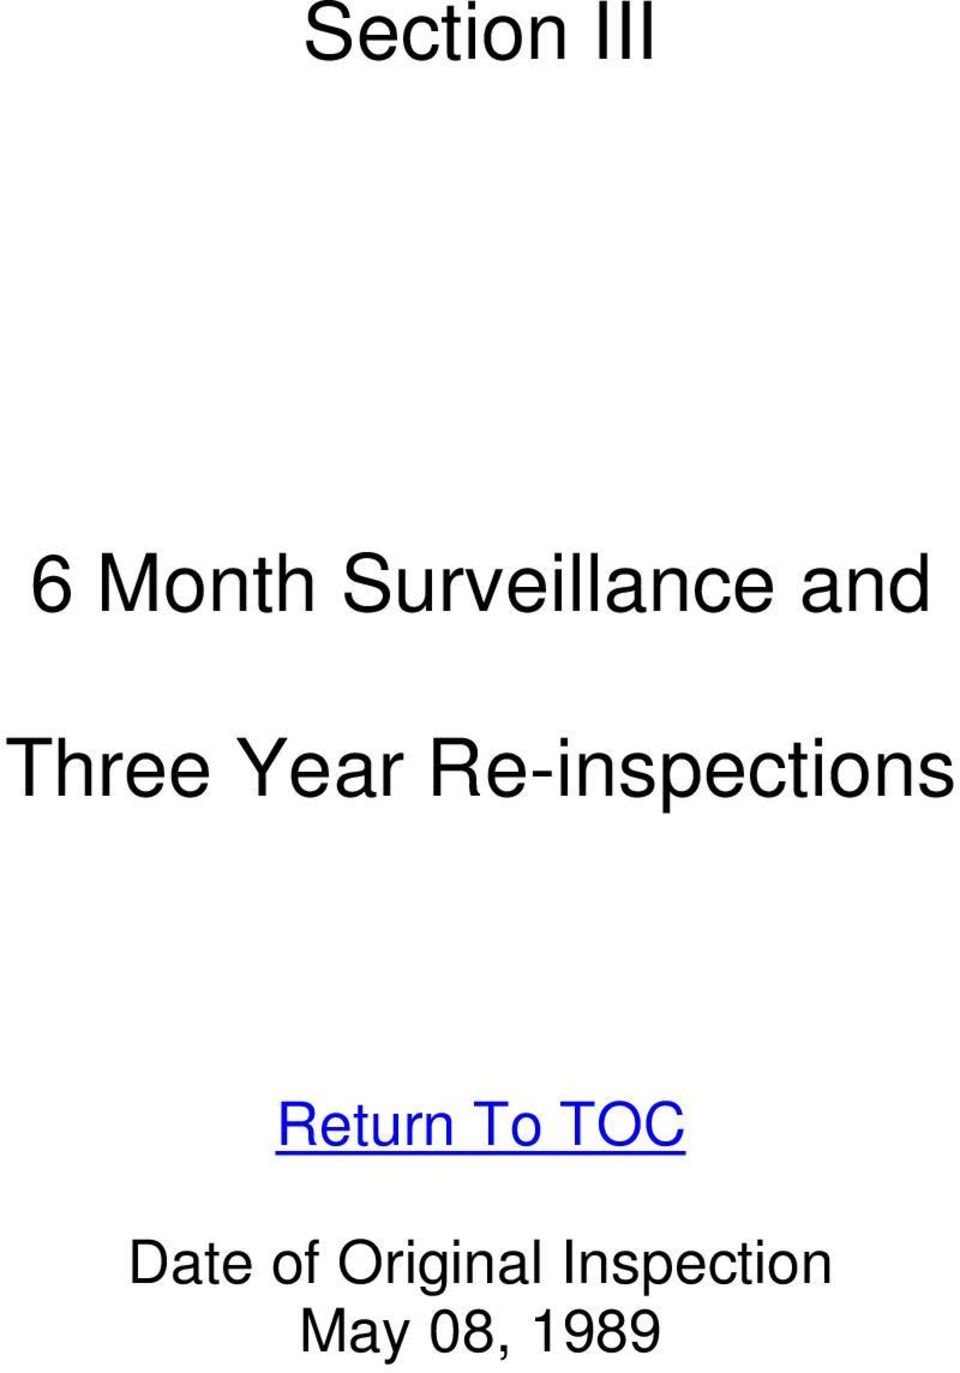 Re-inspections Return To TOC